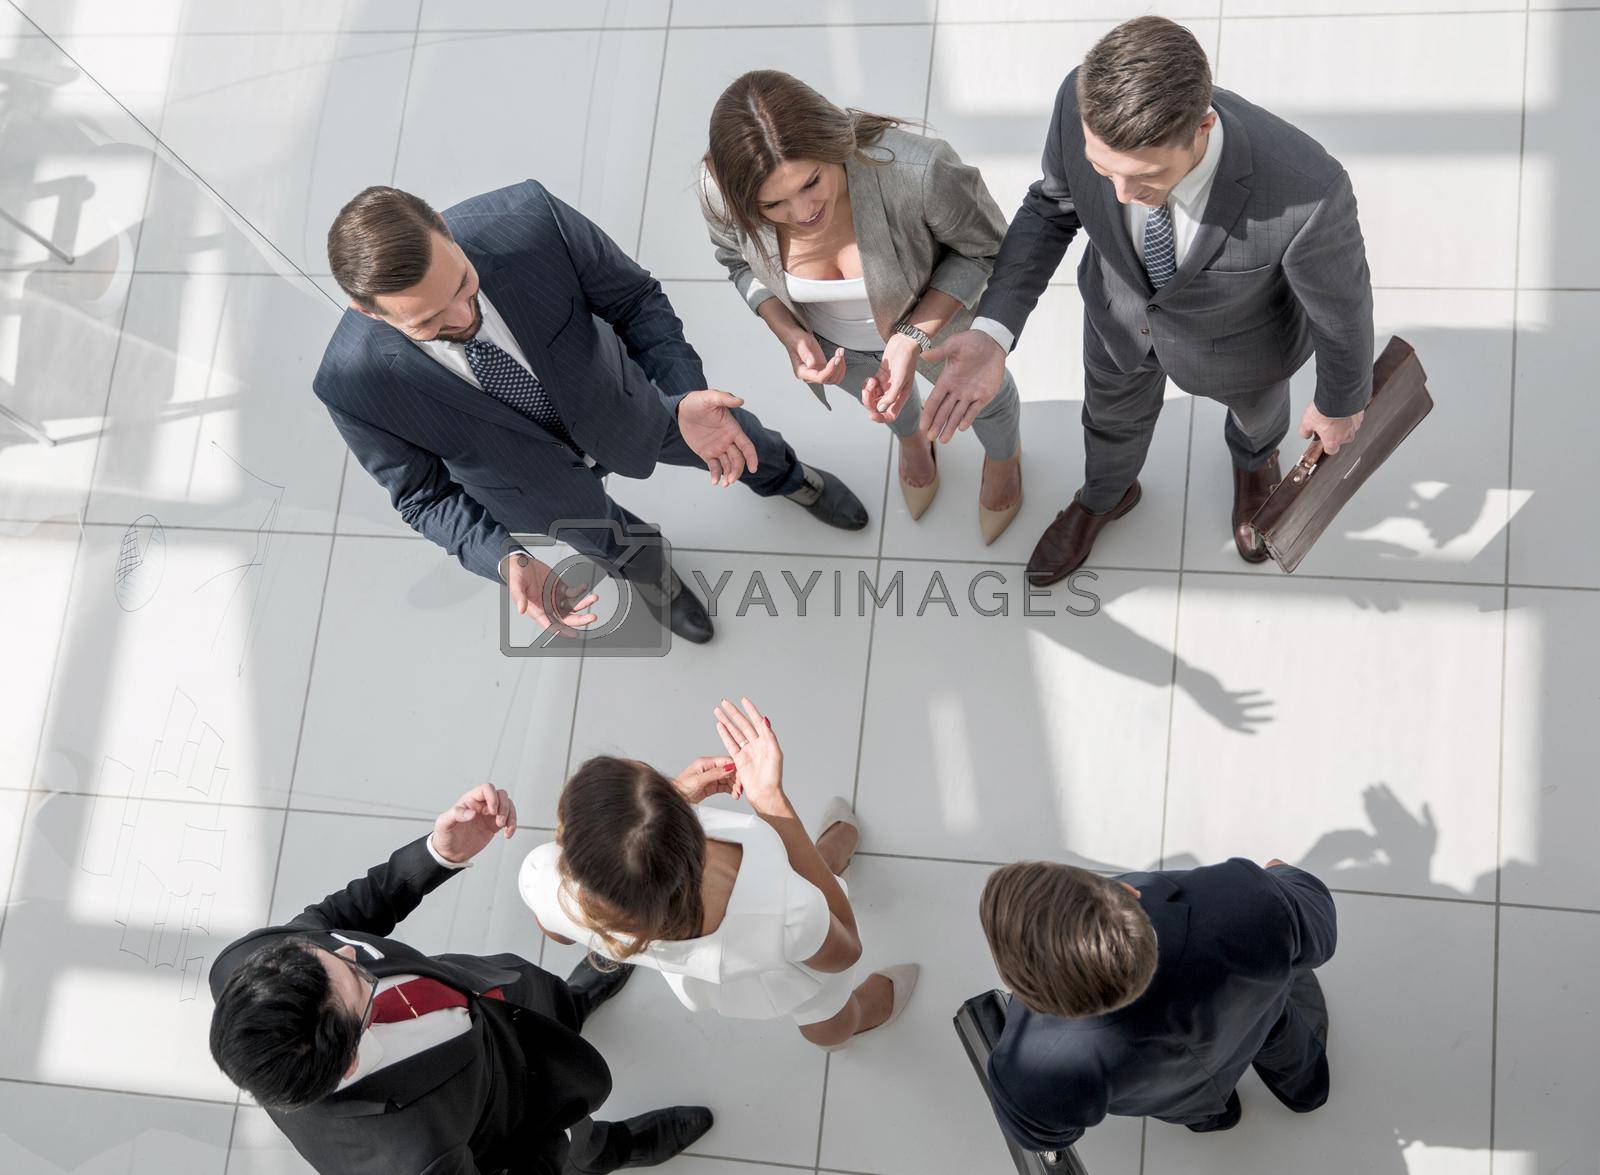 Royalty free image of top view. employees discussing important issue by asdf